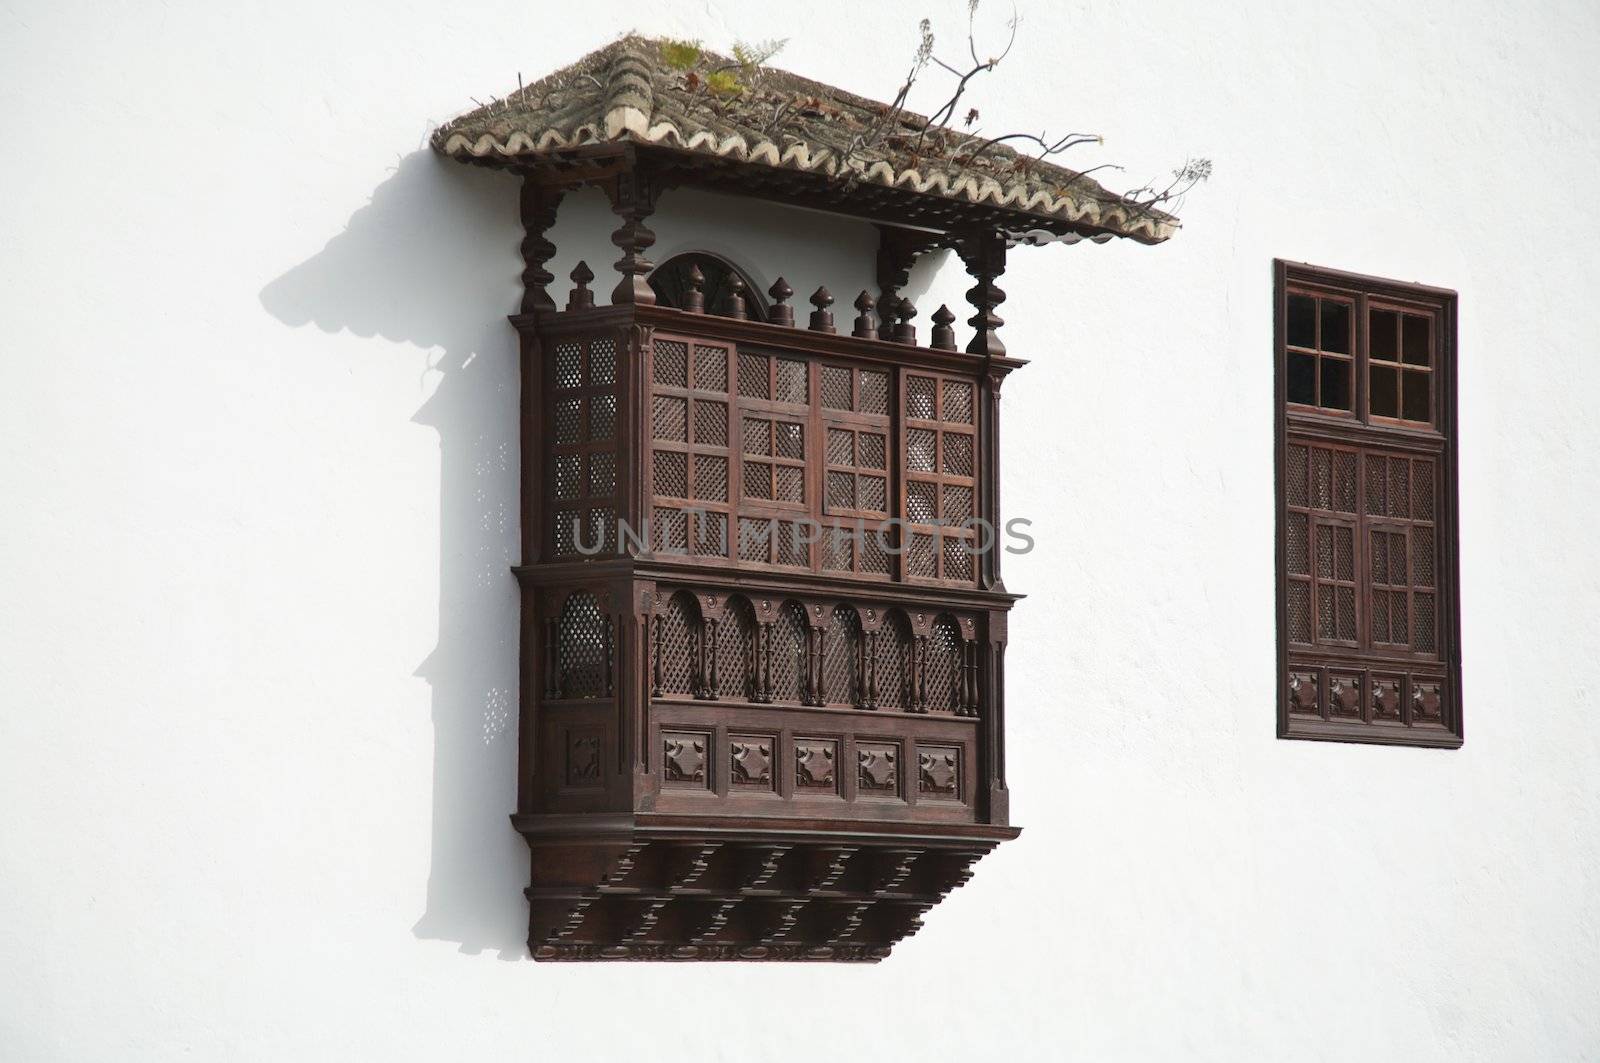 typical balcony at canary islands 400 years old